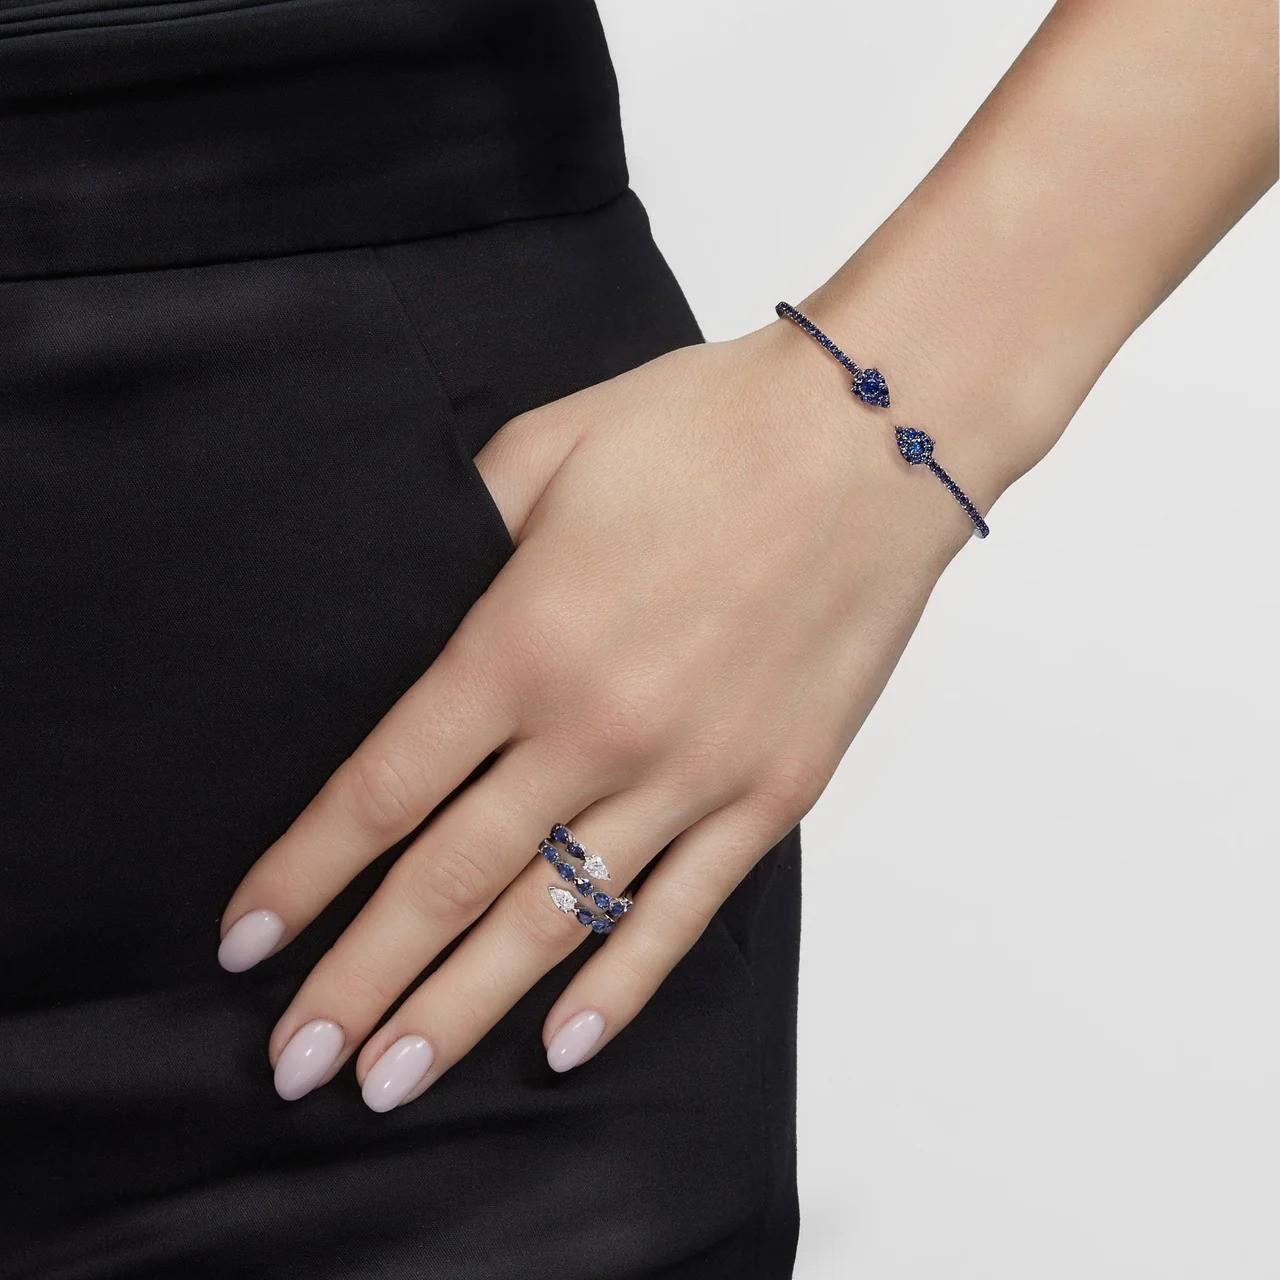 Three rows of shining gems comprise the breathtaking Sapphire and Diamond Twist Ring. Elegant pear-shaped blue sapphires contrast with classic white diamonds, all set in 18-karat white gold. Wear the ring with denim, heels and your favorite Hermés